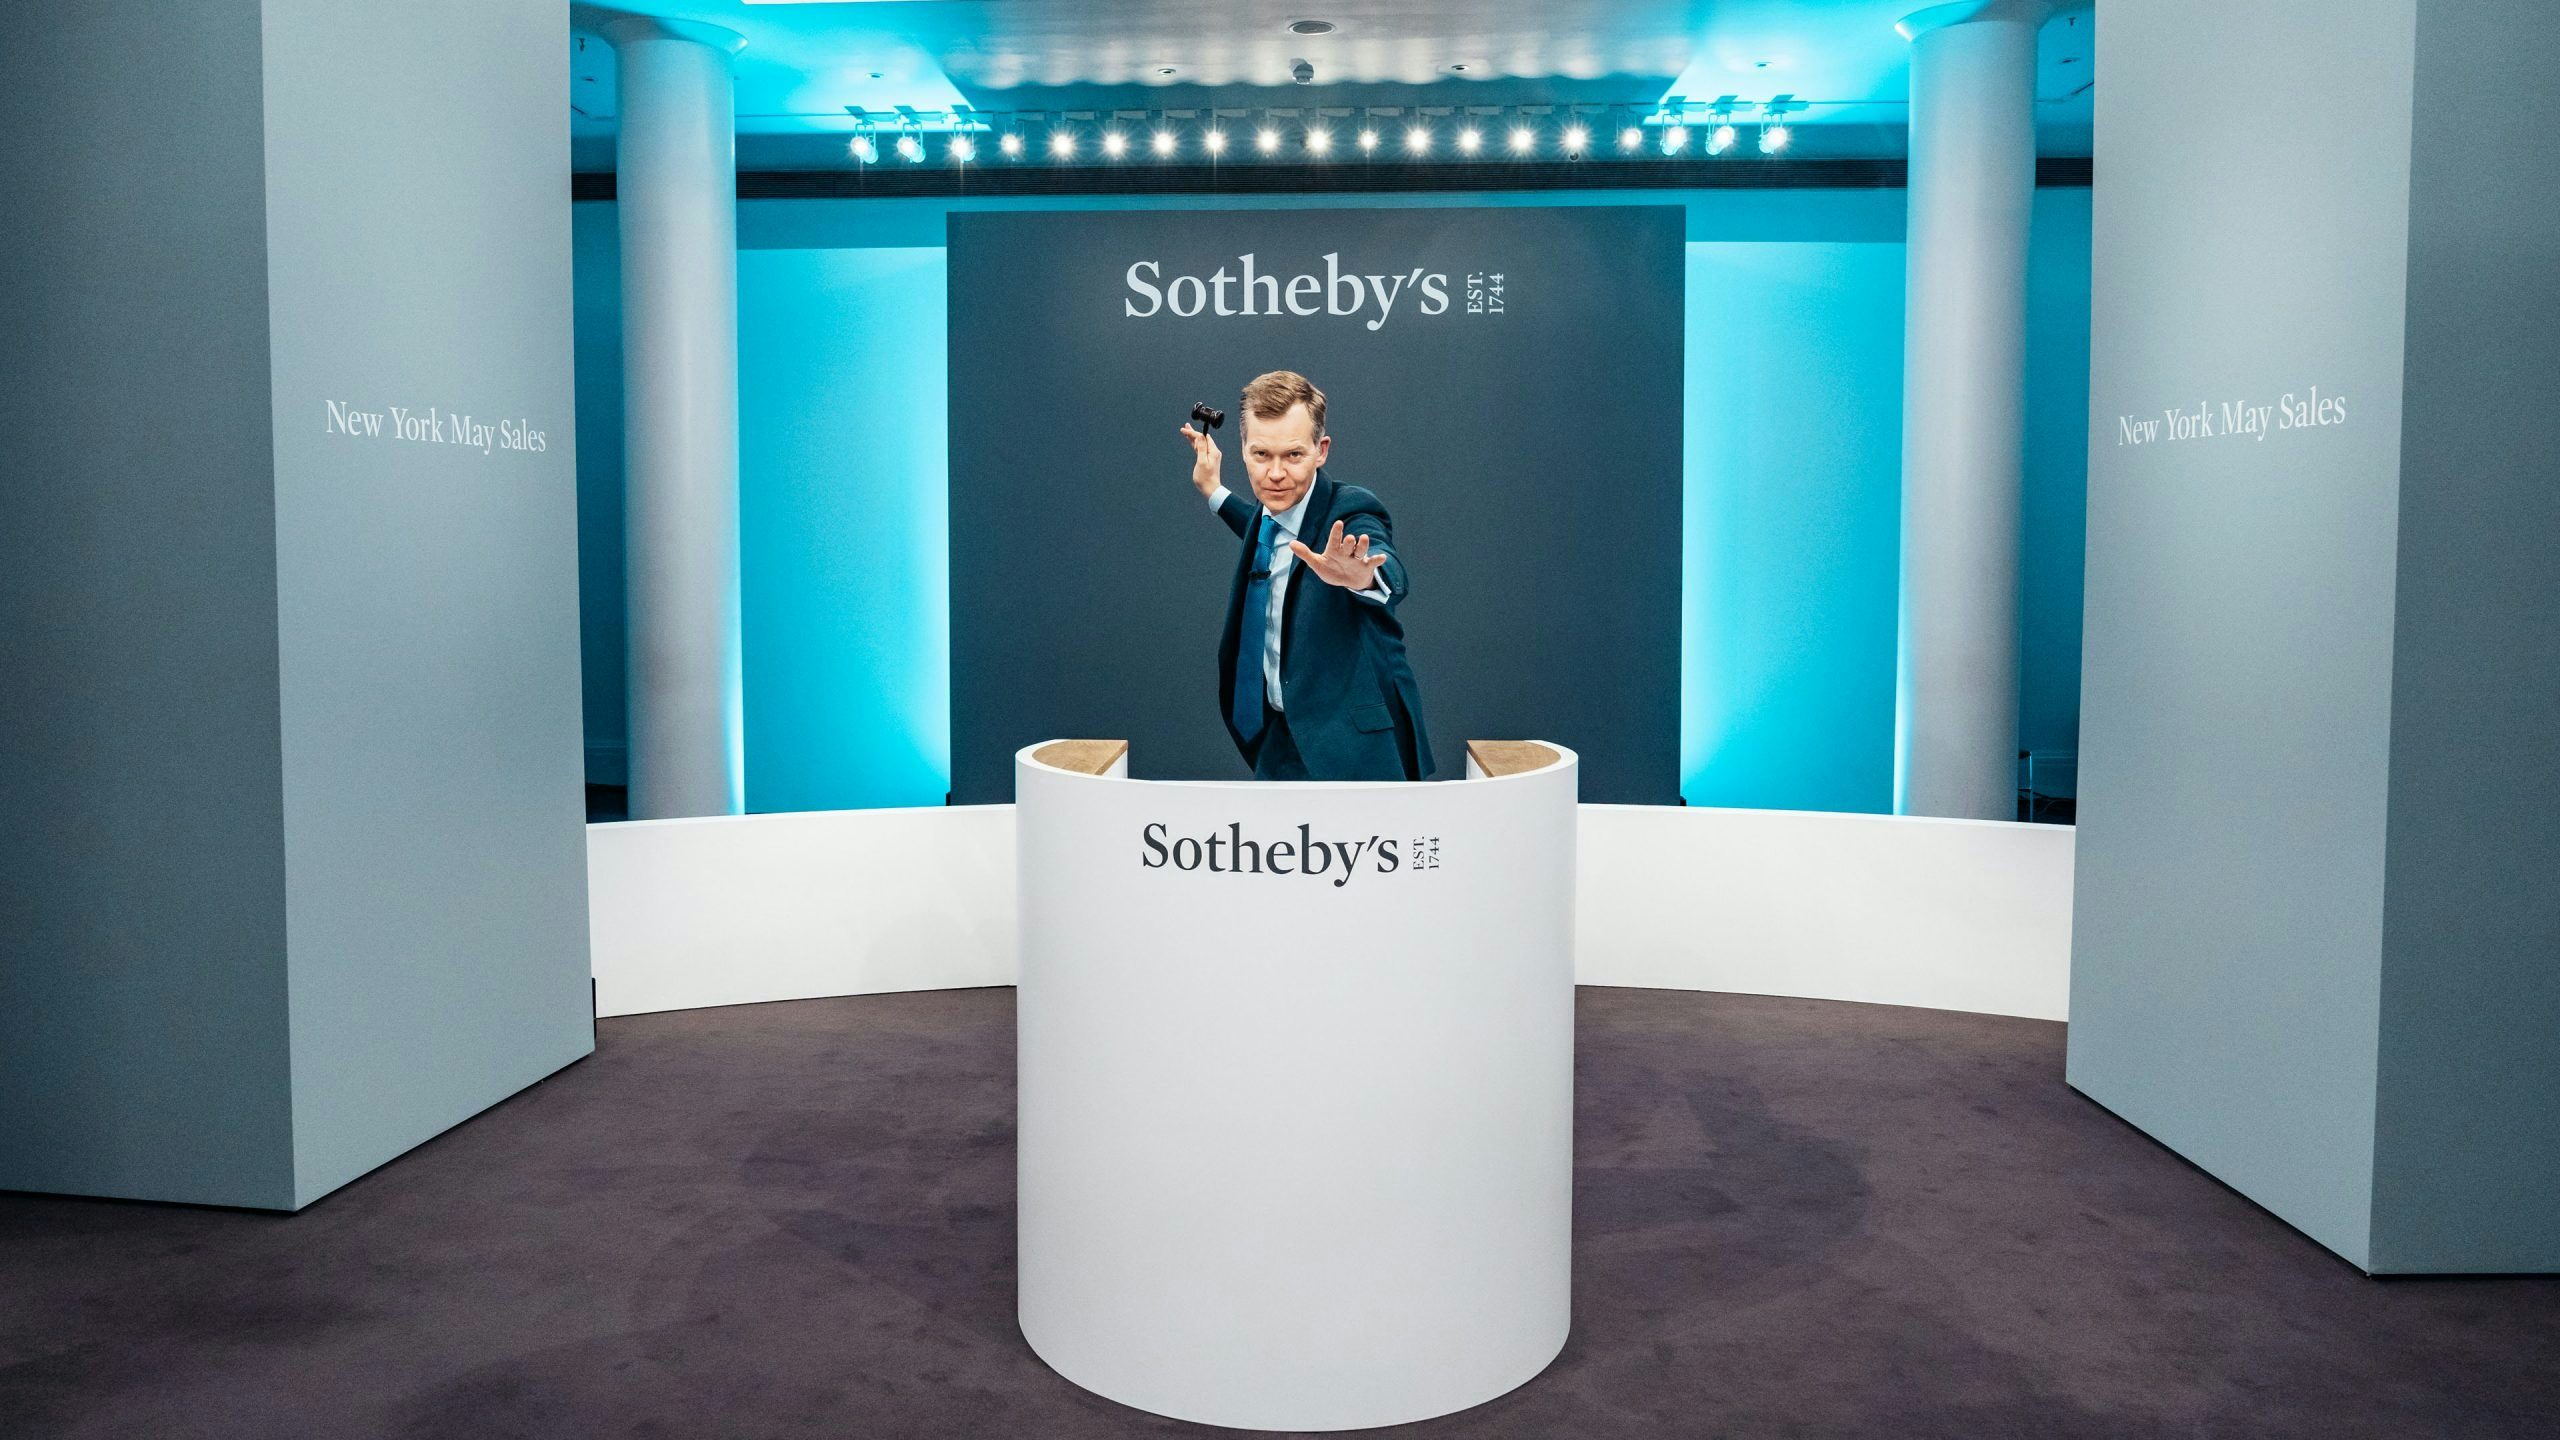 This Sotheby’s x Loewe Collab Is The Future Of Brand Partnerships